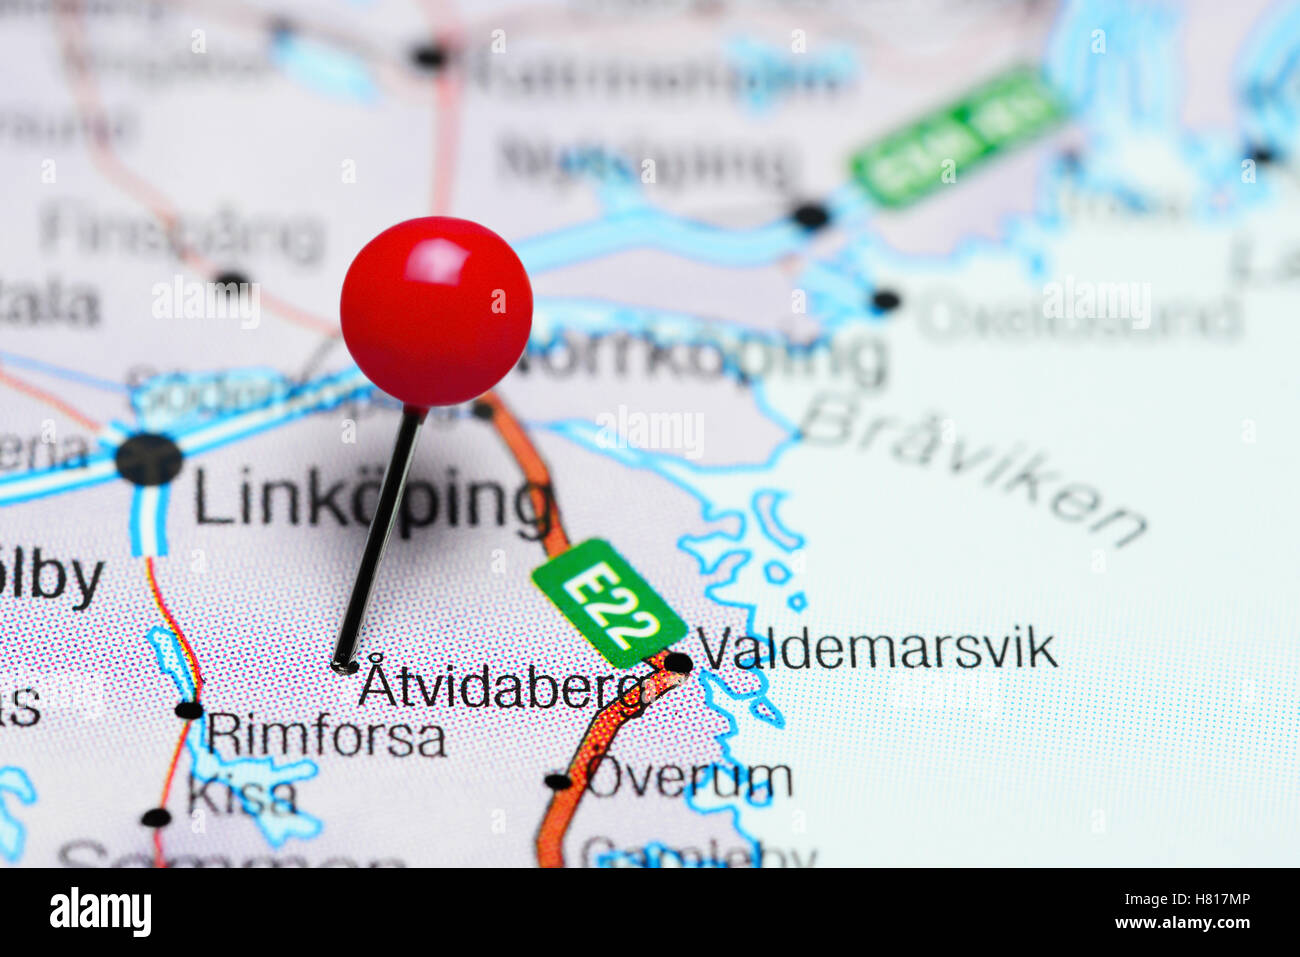 Atvidaberg pinned on a map of Sweden Stock Photo